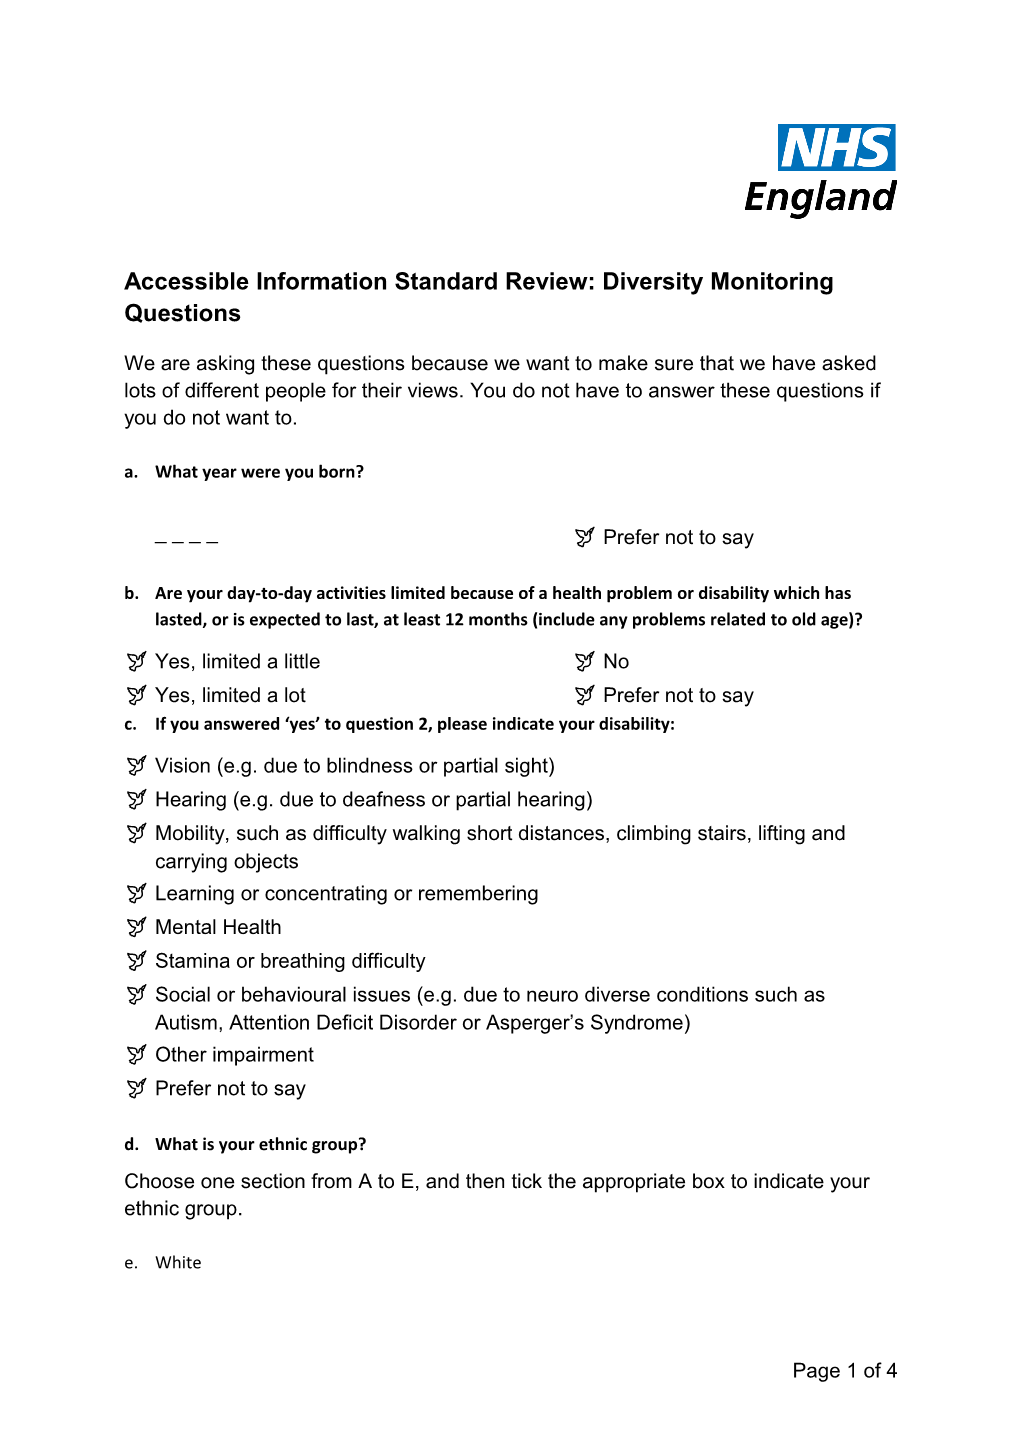 Accessible Information Standard Review: Diversity Monitoring Questions